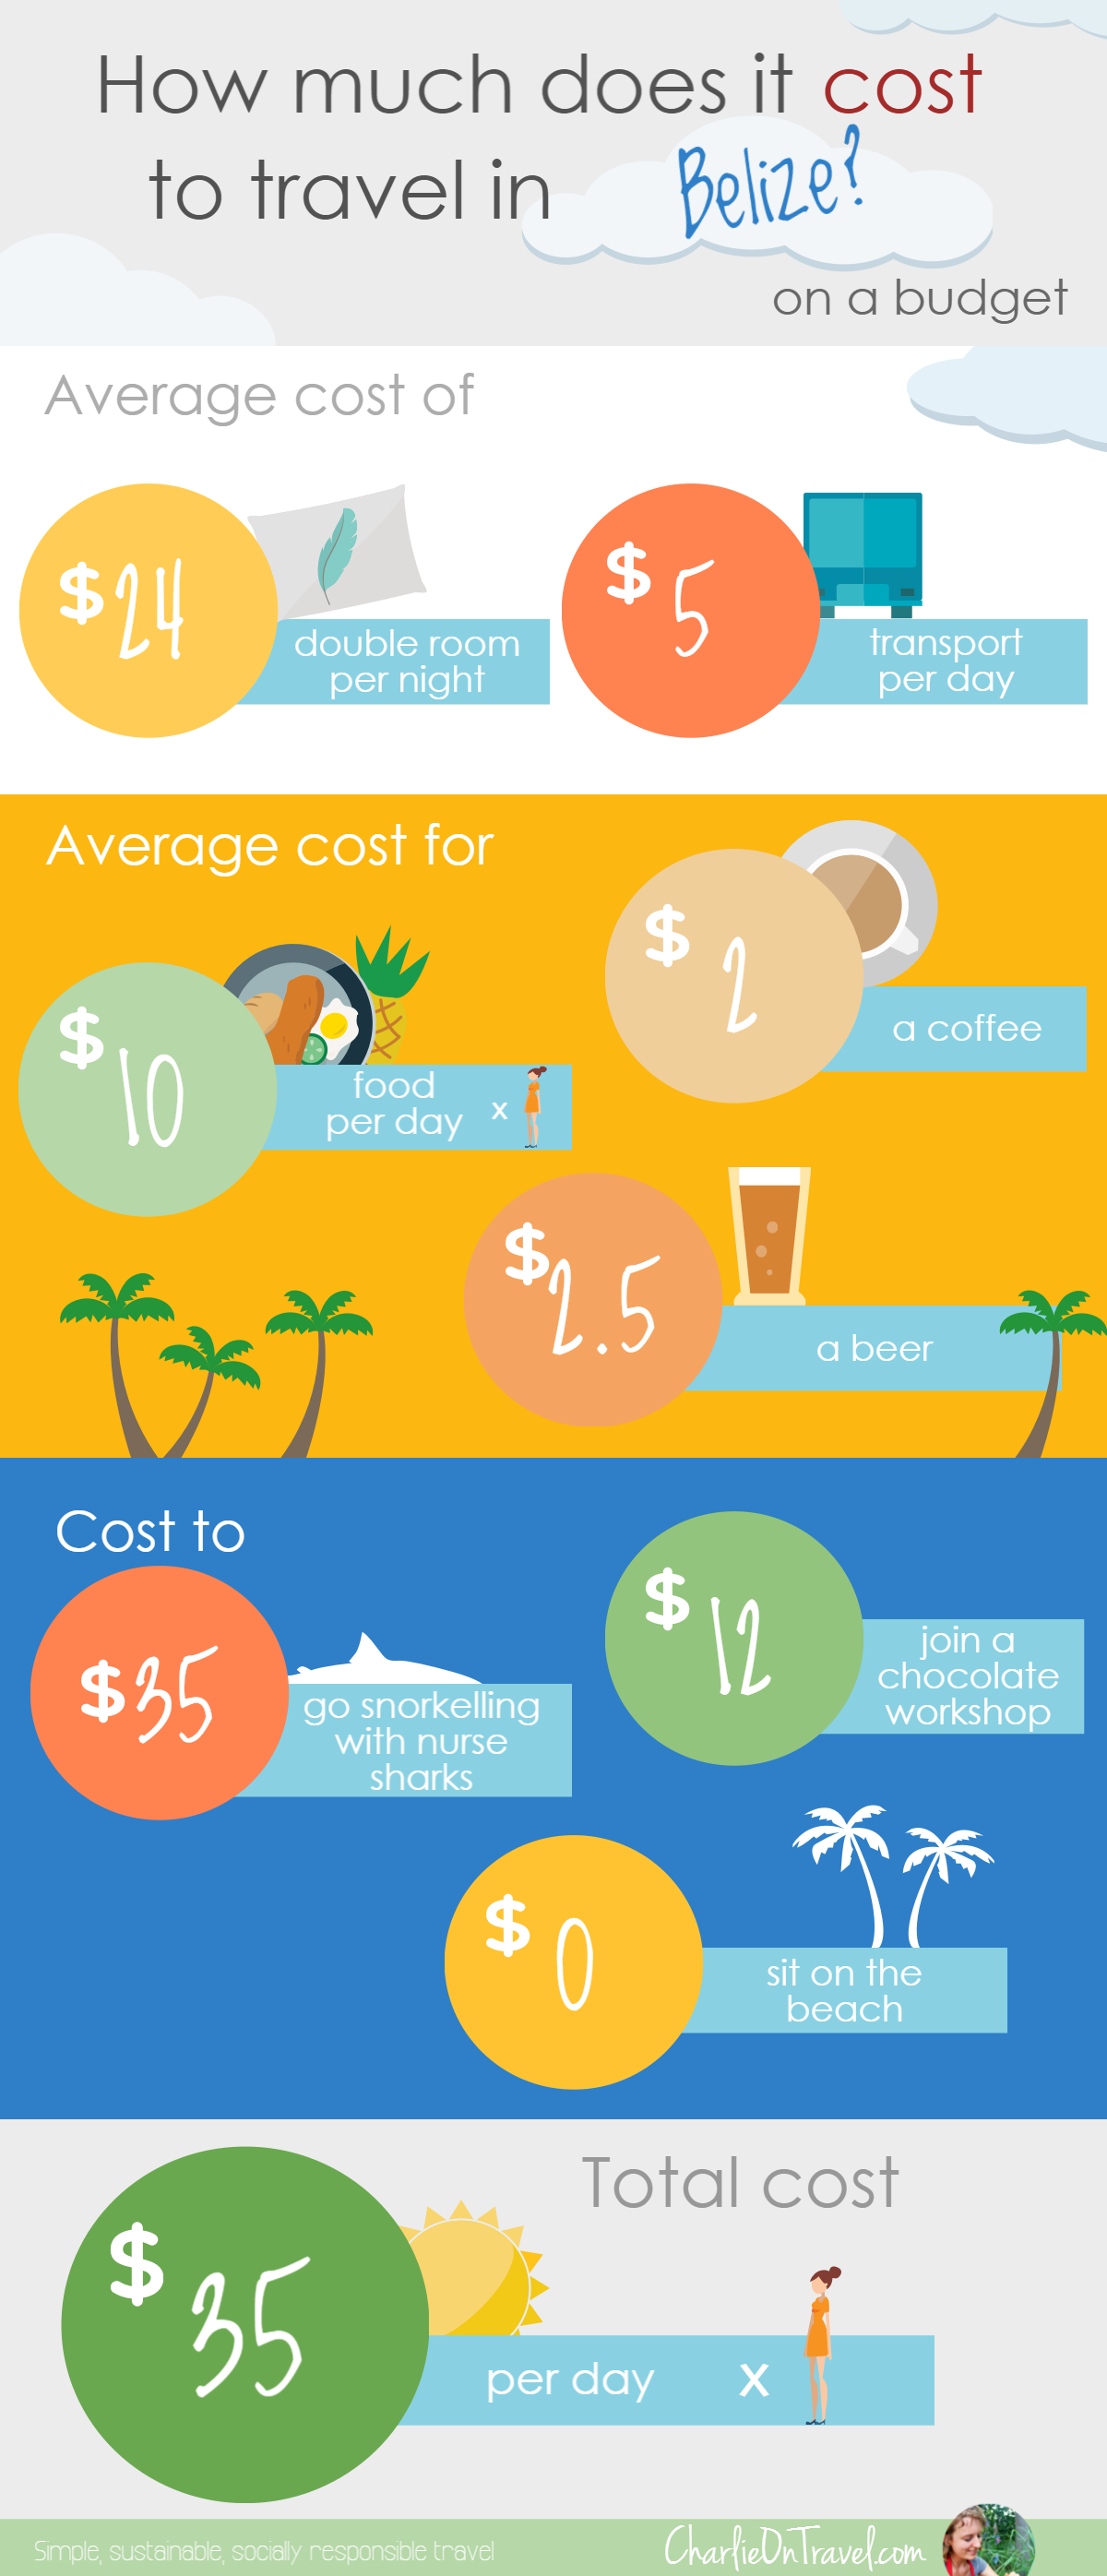 belize daily travel budget